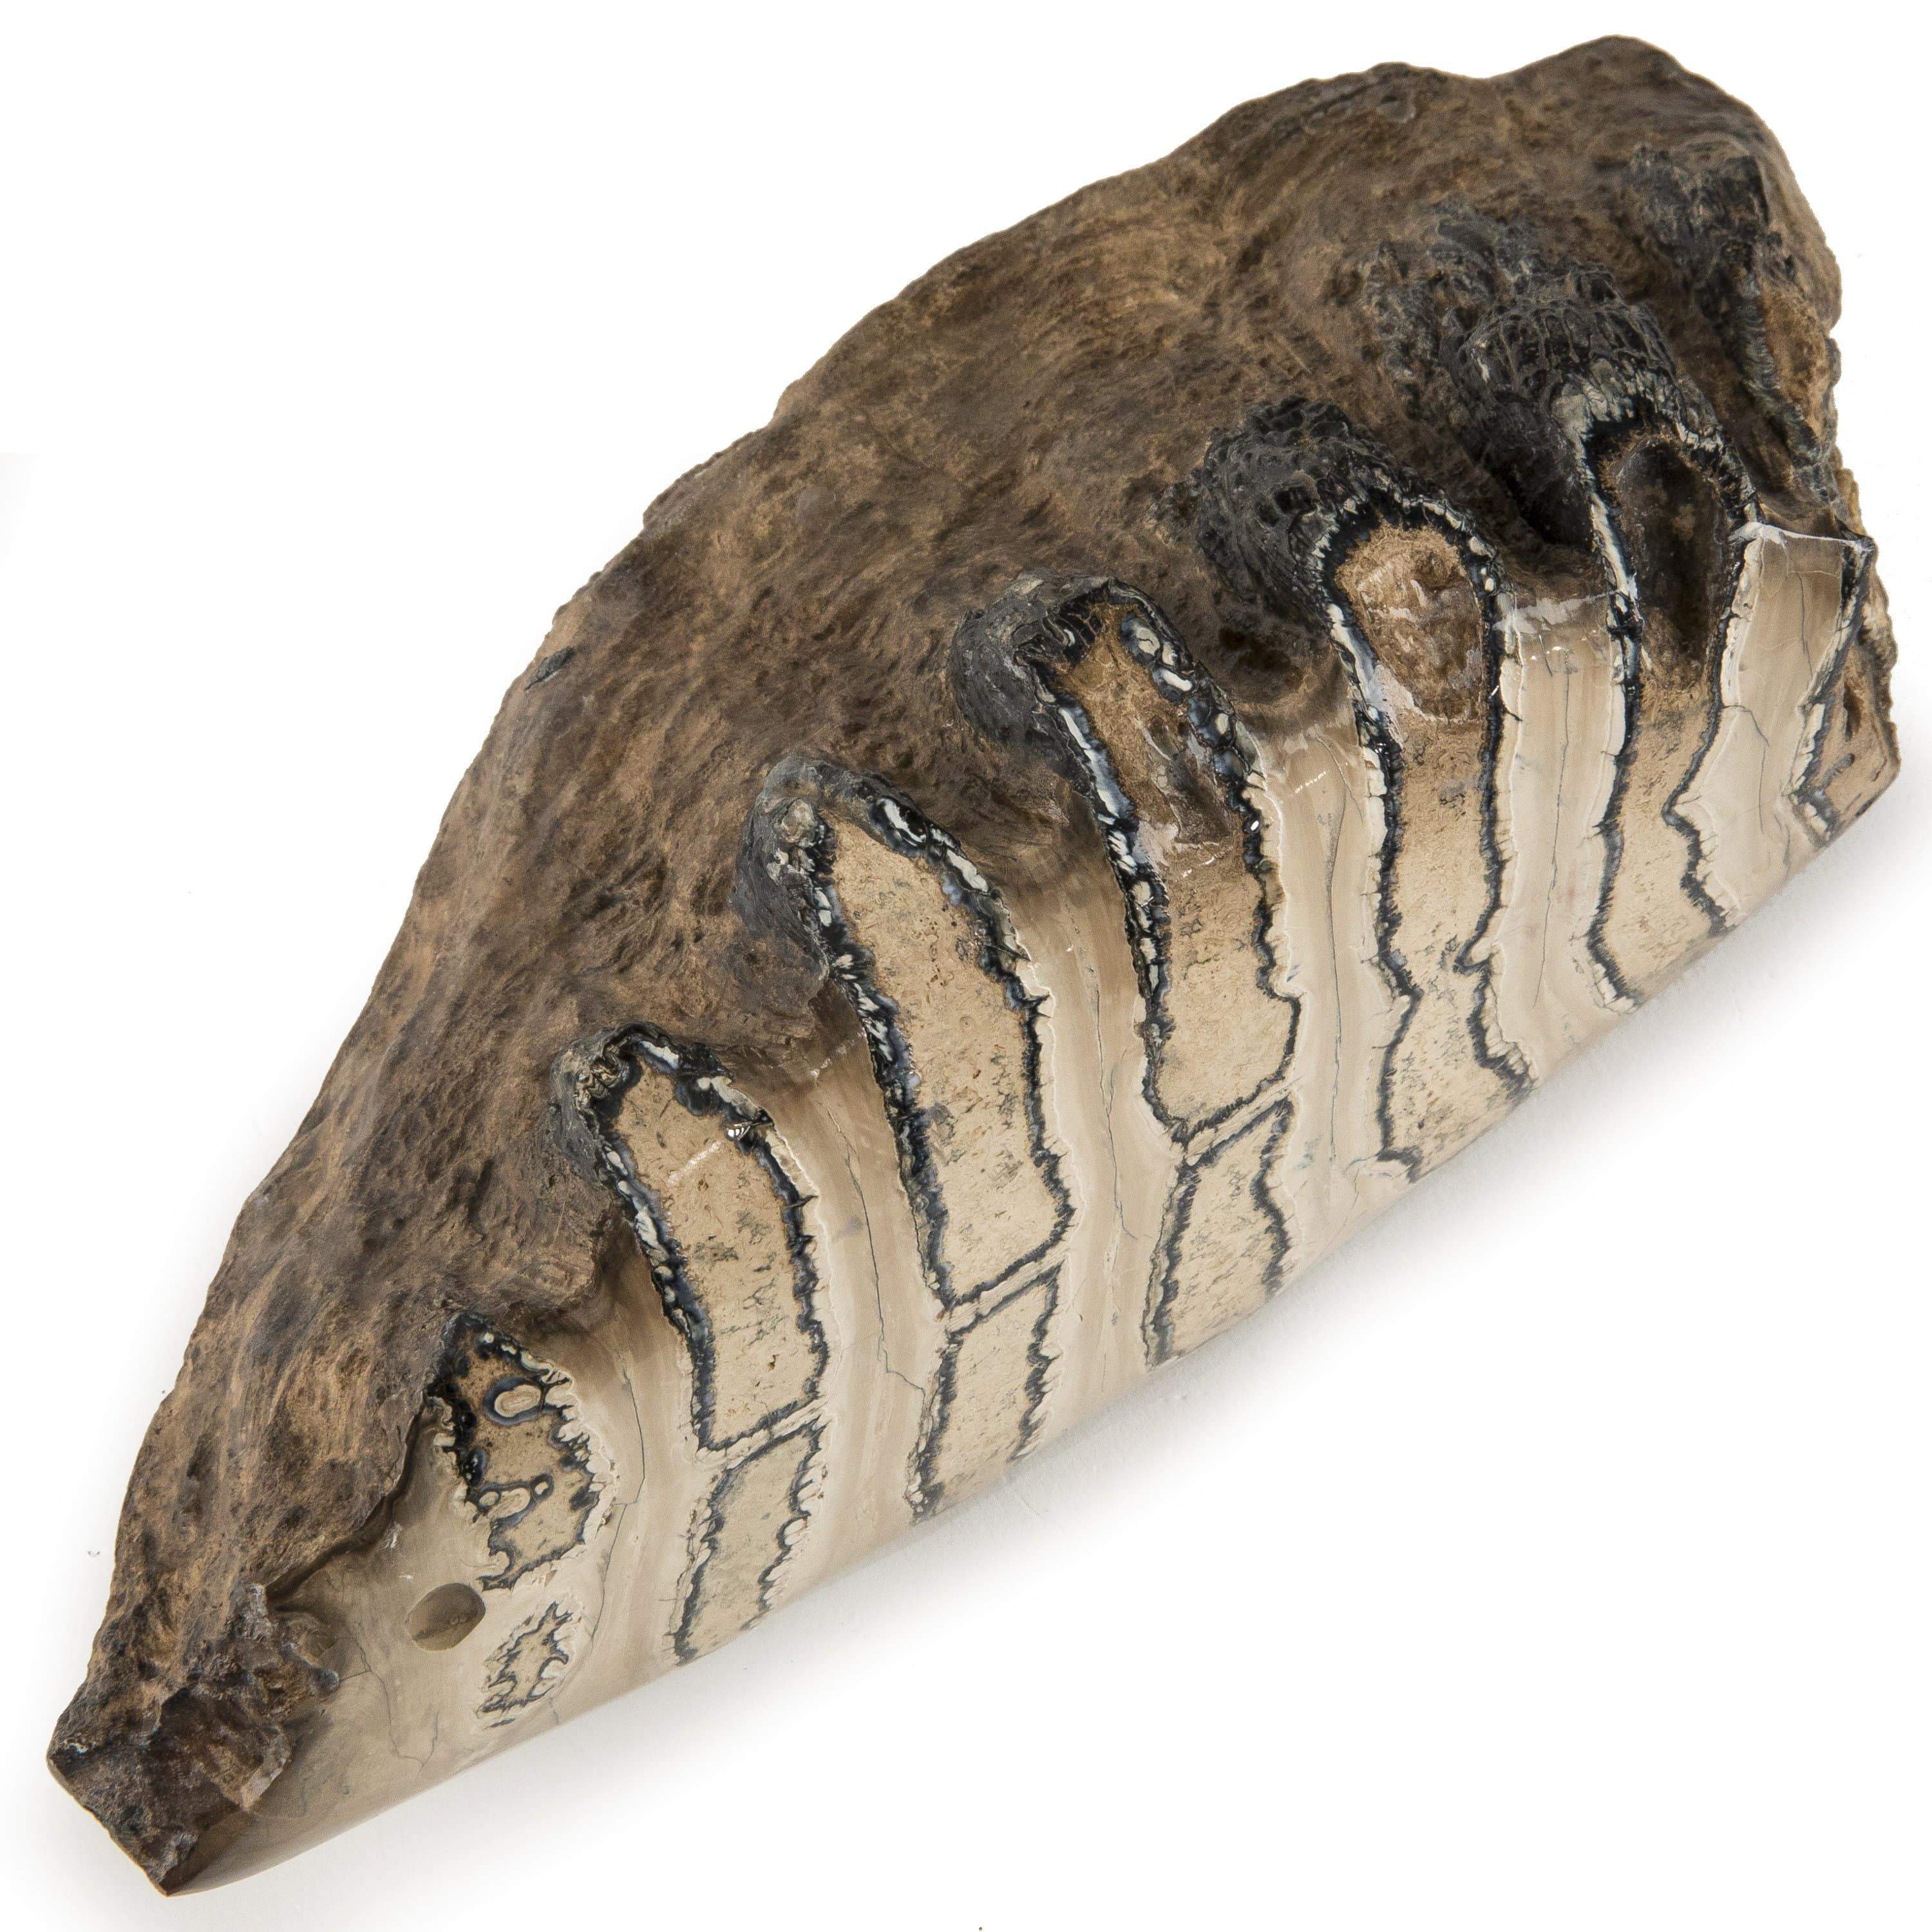 Kalifano Mammoth Molars Authentic Polished Columbian Mammoth Molar Section - 4 in WM4000.002